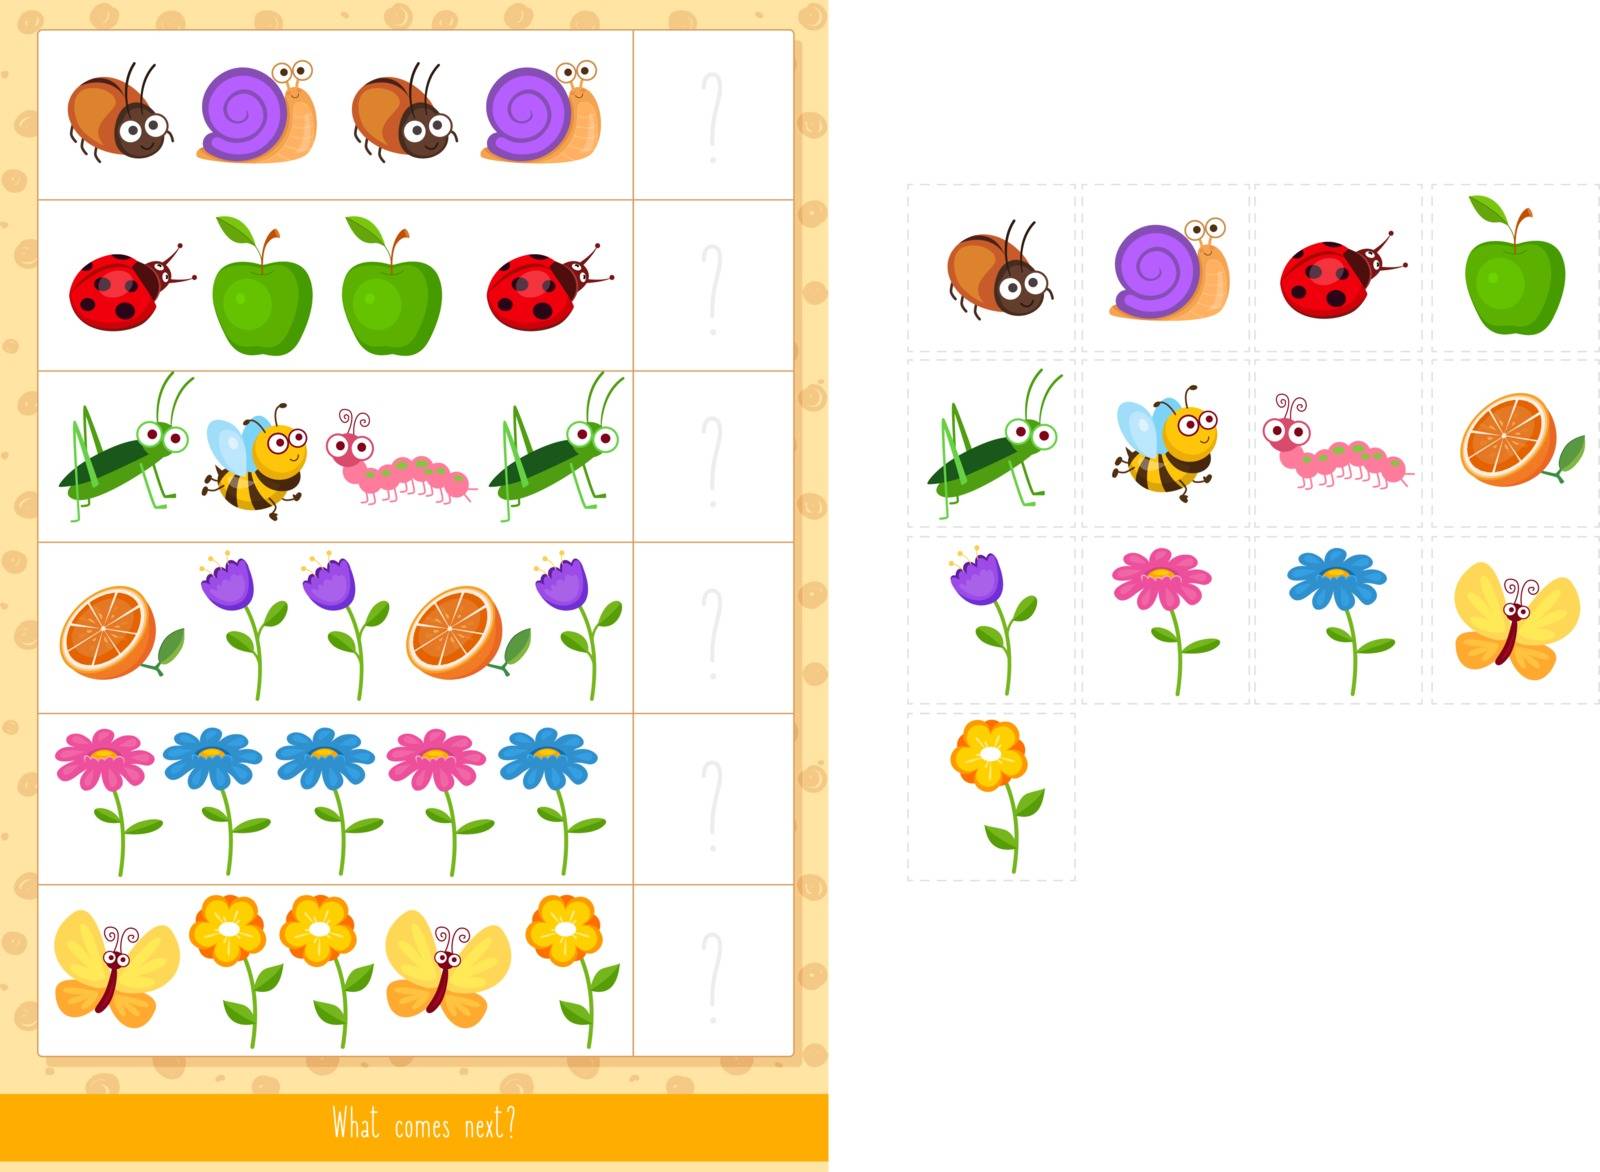 Educational children game, vector illustration. Logic game. What comes next